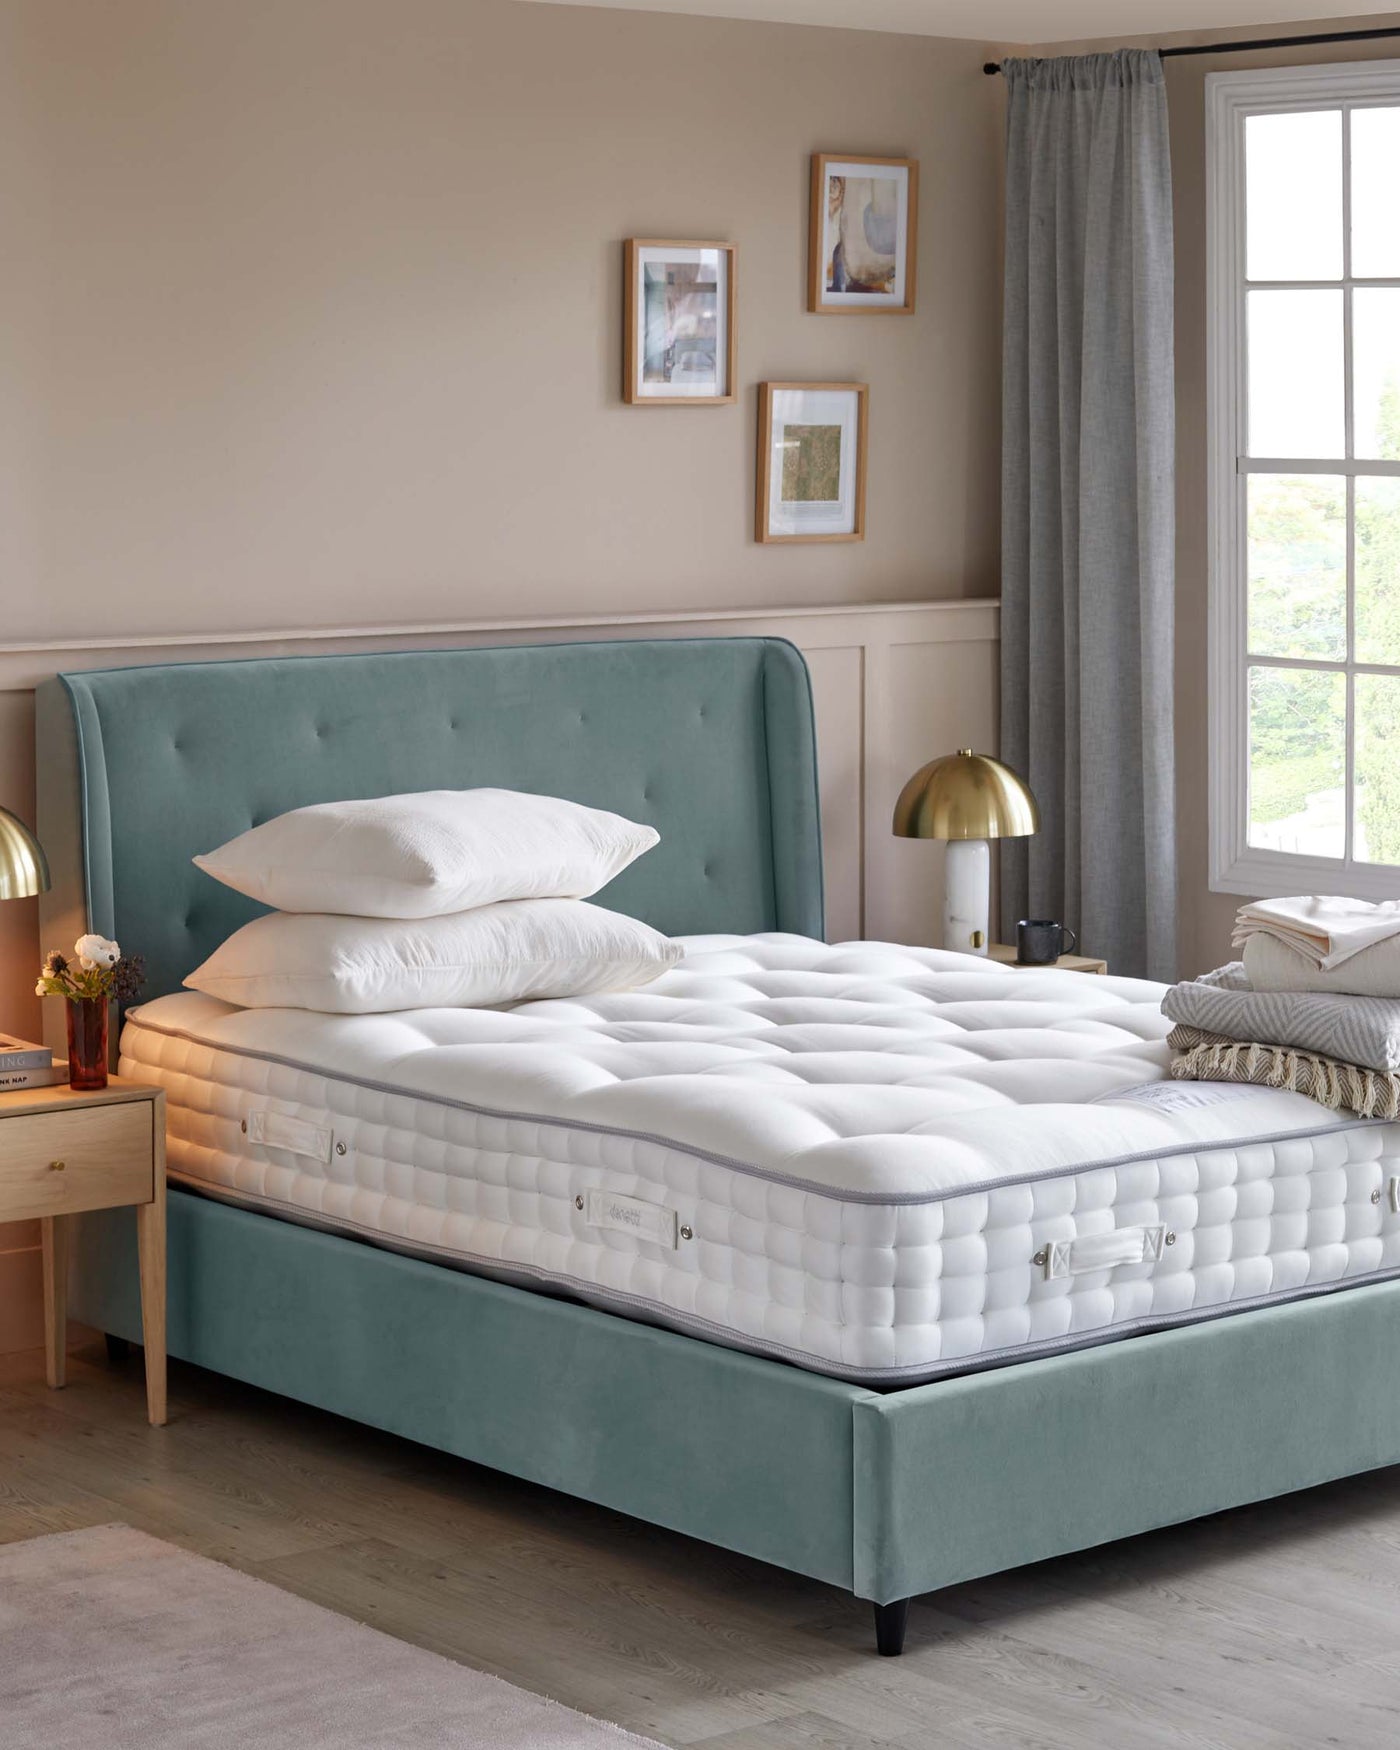 Elegant teal upholstered bed frame with tufted headboard and plush white mattress, accompanied by a small, light wooden bedside table with a drawer, all set against a soft, neutral decor.